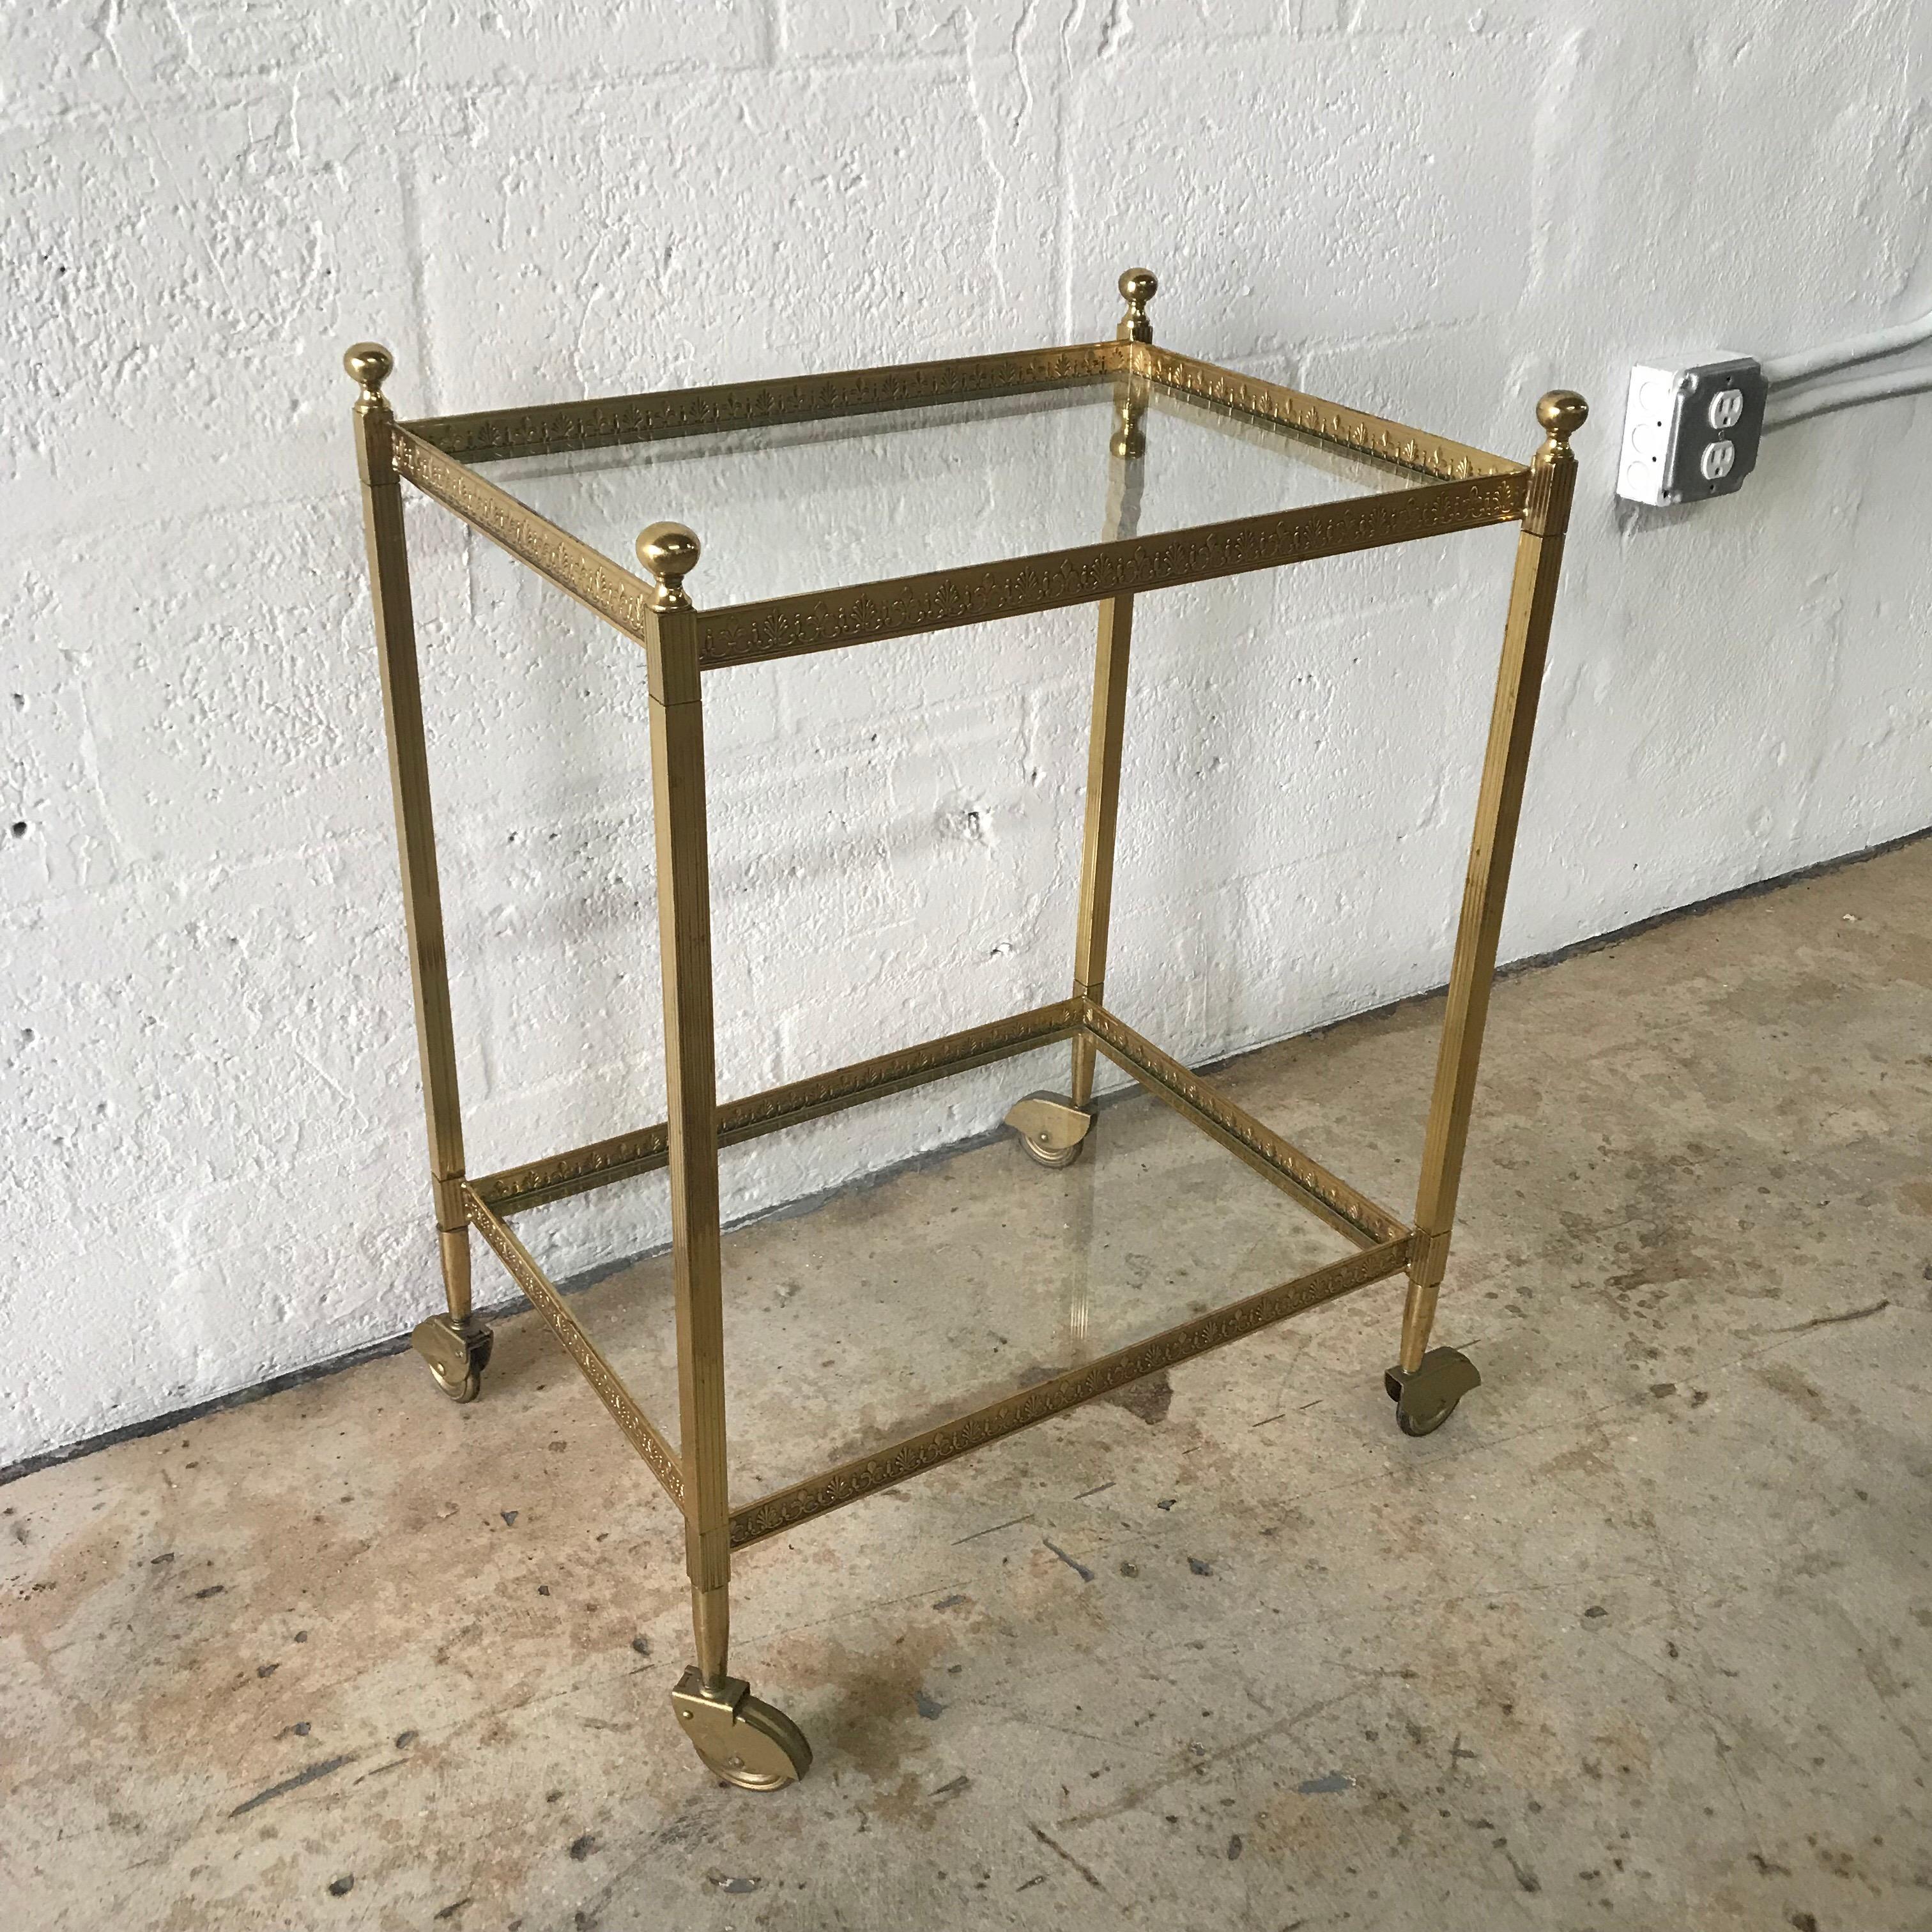 Pair of Maison Jansen Brass and Glass Two-Tier Rolling Occasional Tables or Cart (20. Jahrhundert)